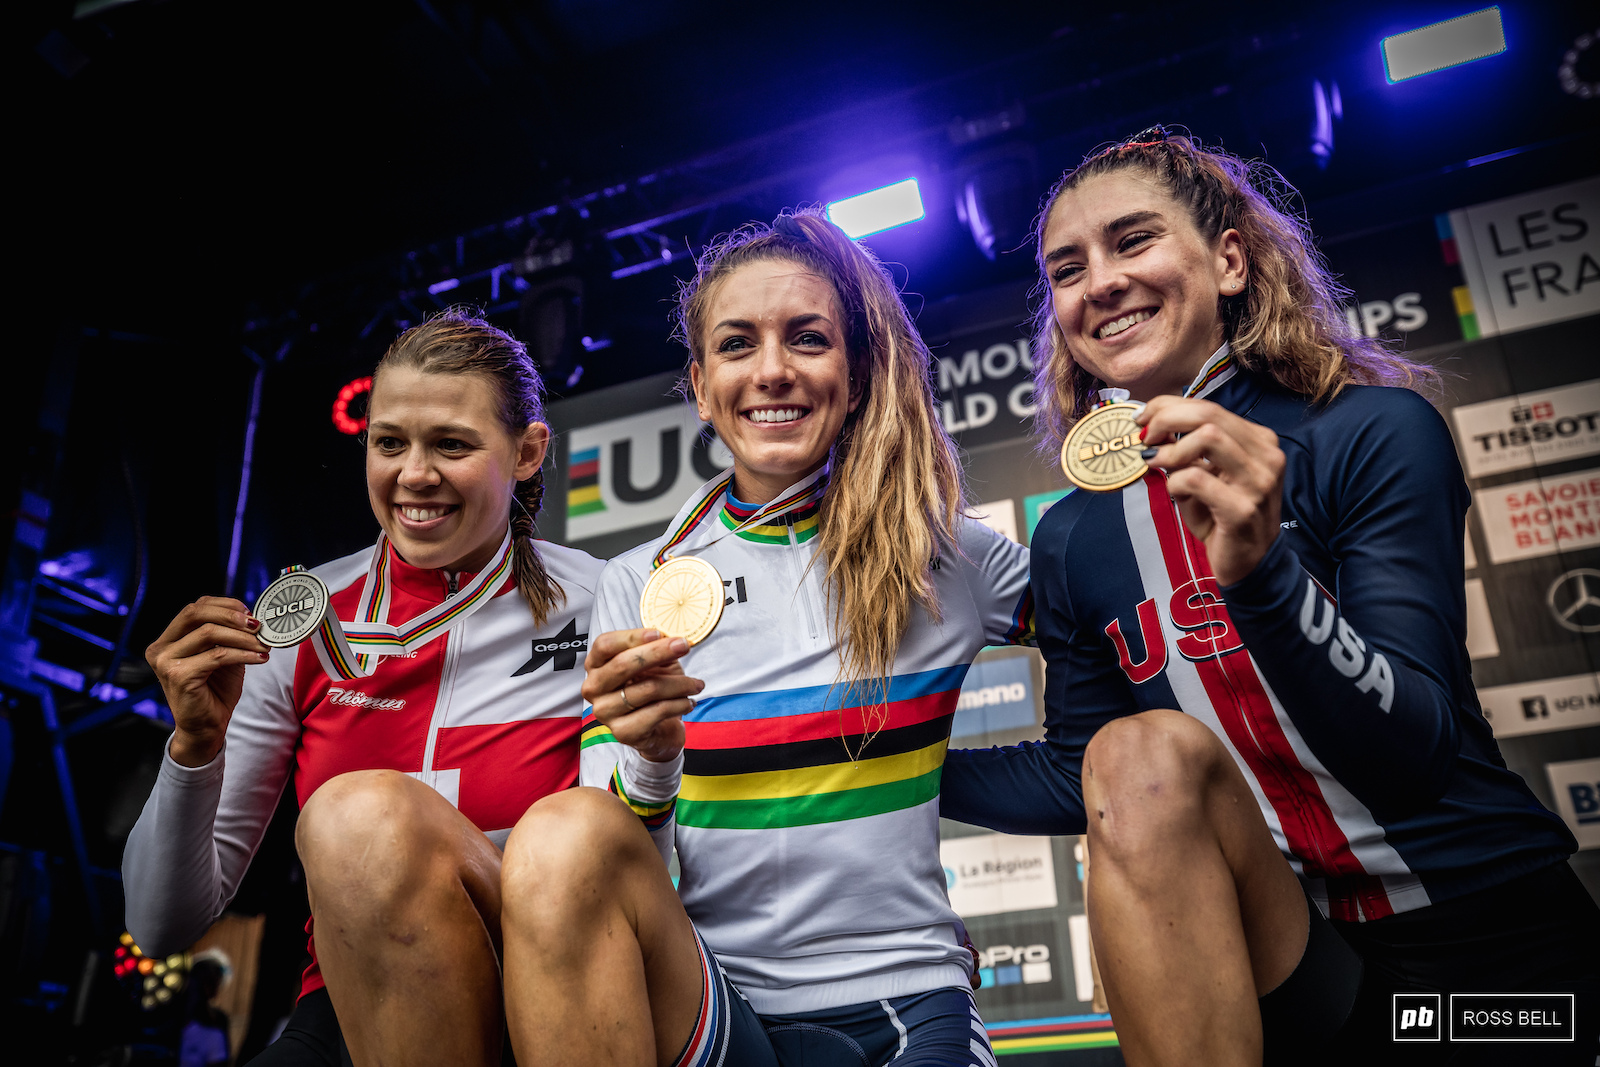 Pauline Ferrand Prevot takes gold in front of Alessandra Keller and Gwendalyn Gibson.